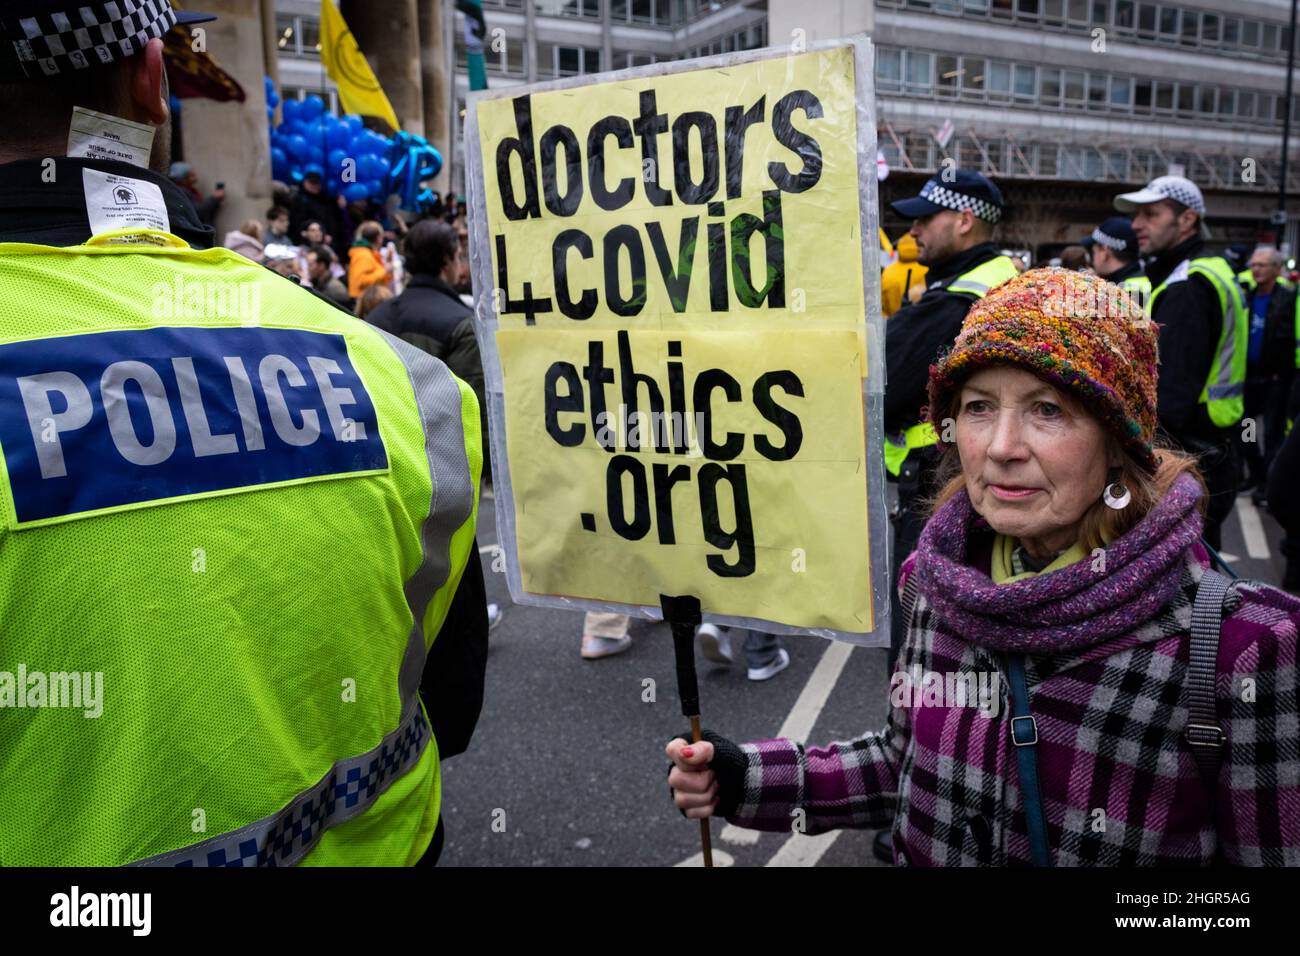 London, UK. 22nd Jan, 2022. A protester with a placard waits the start of the rally. As the mandate to get vaccinated against COVID-19 draws ever closer NHS workers join the protest. The anti-lockdown demonstration was organised by the World Wide Rally For Freedom movement. Credit: Andy Barton/Alamy Live News Stock Photo